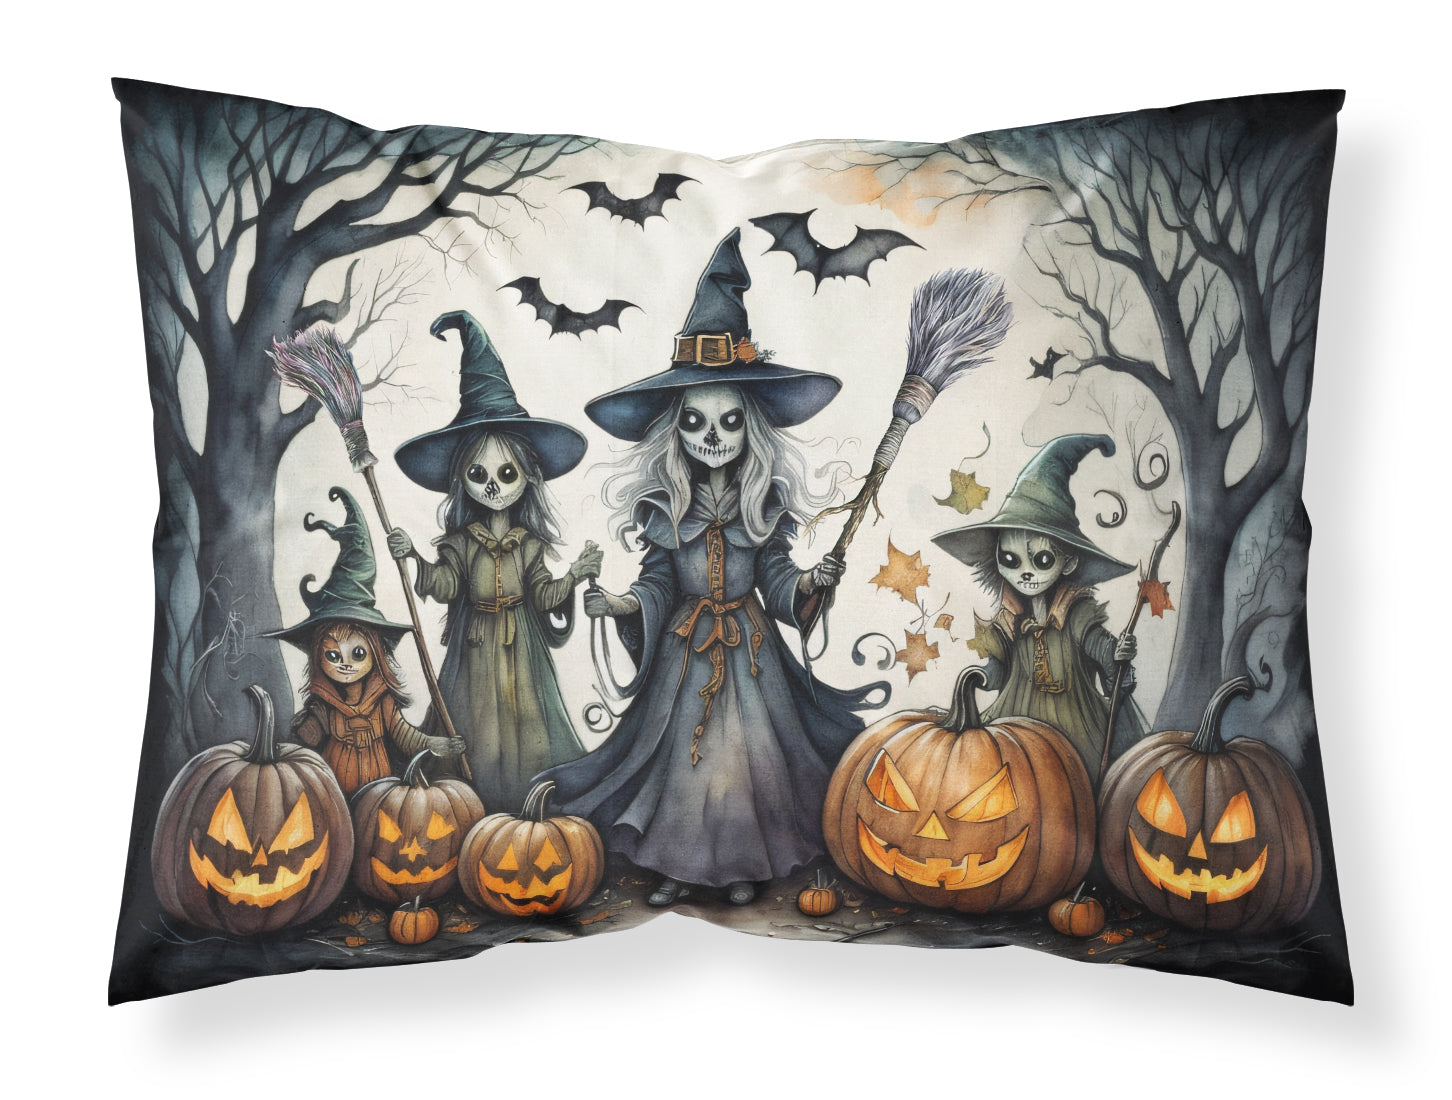 Buy this Witches Spooky Halloween Fabric Standard Pillowcase